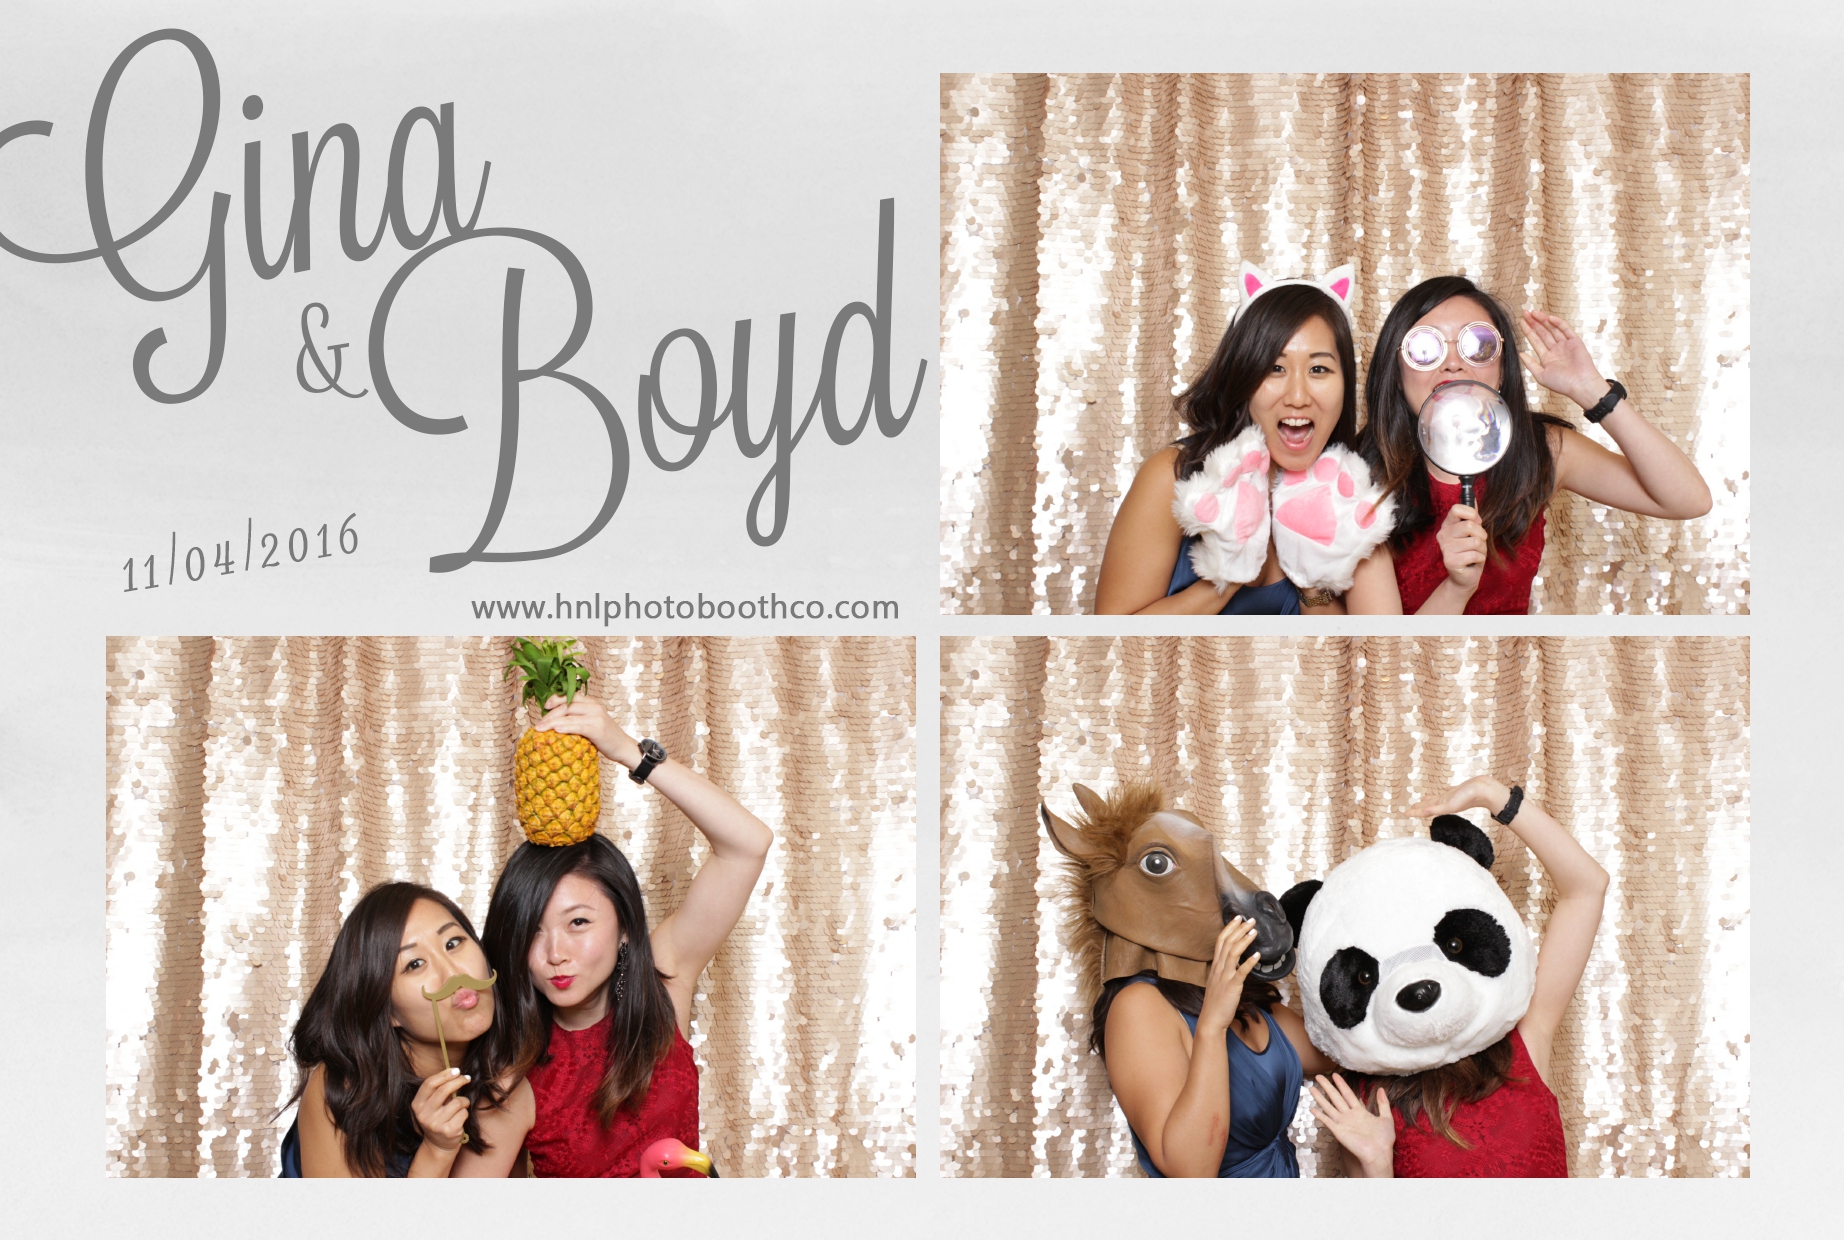 how to have a party in oahu honolulu kapolei ko olina parties photography hawaii wedding vendor party photo booths rental prices hour dj flourists make up and hair photobooth The kahala hotel ballroom